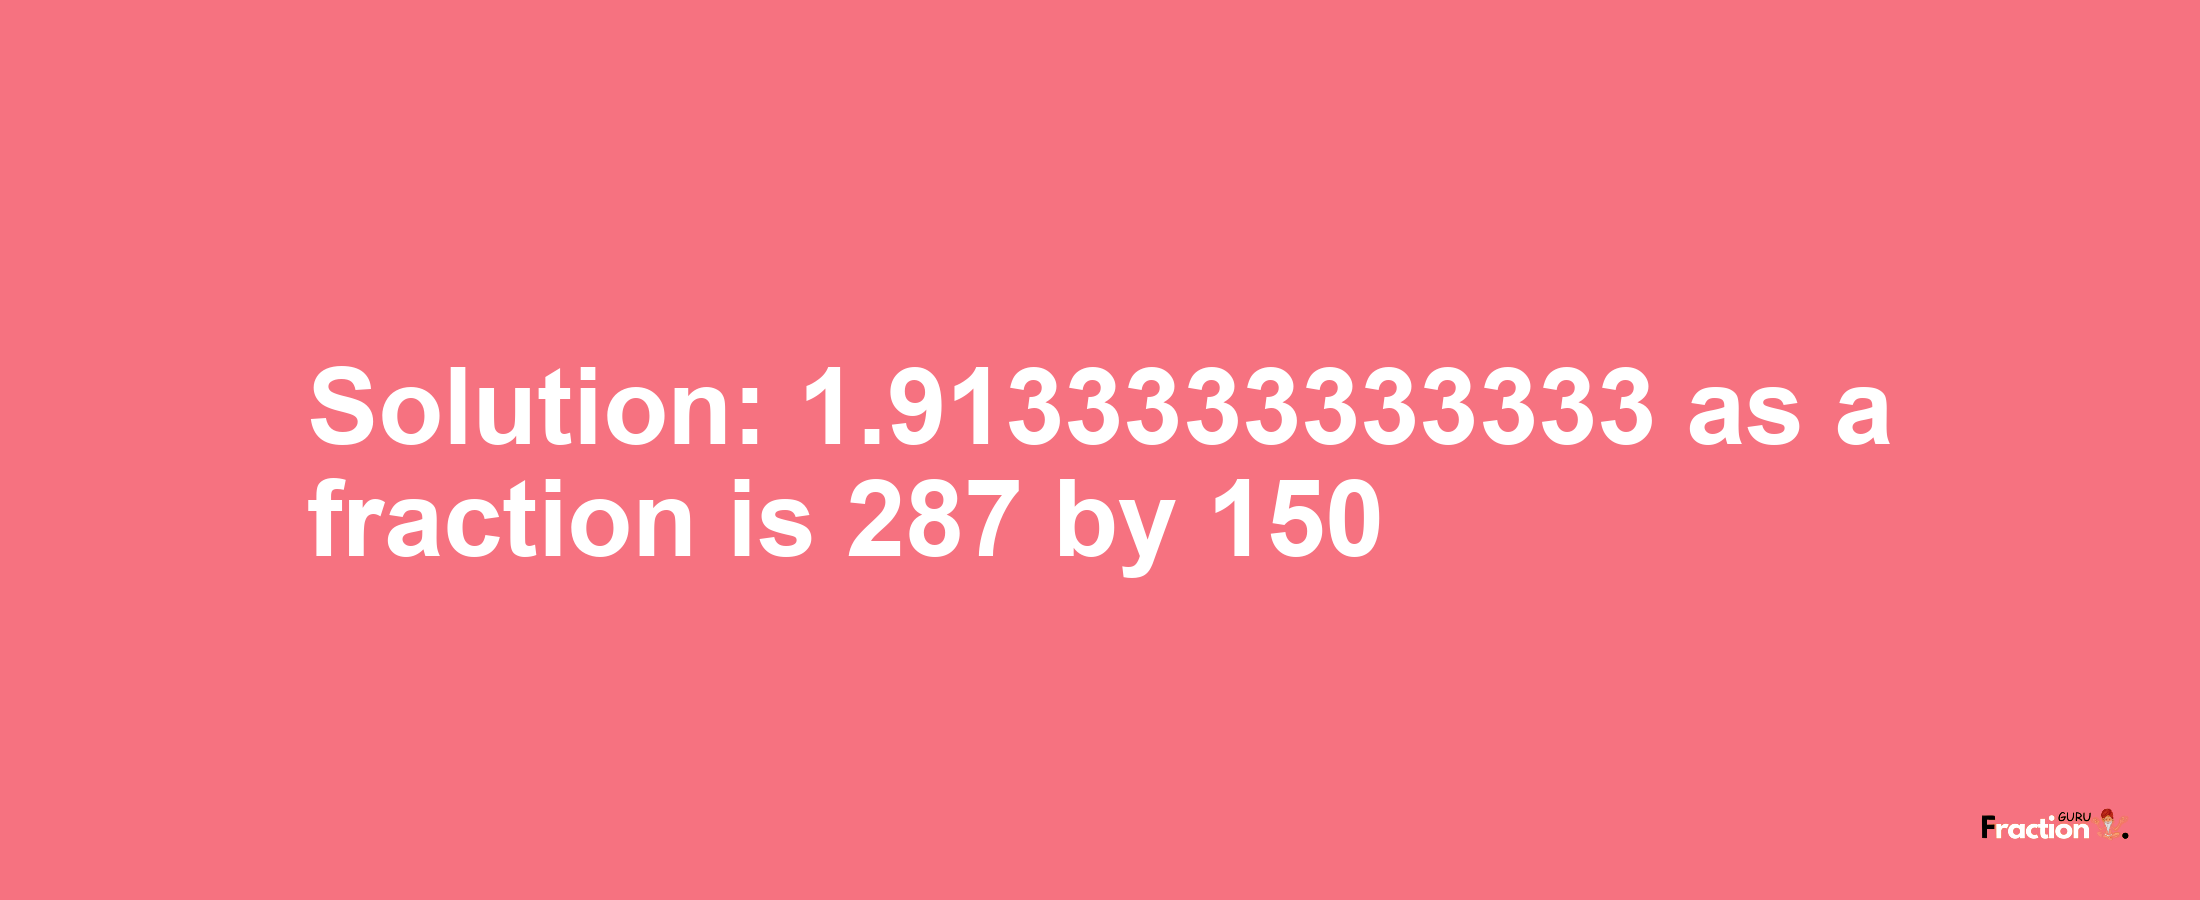 Solution:1.9133333333333 as a fraction is 287/150